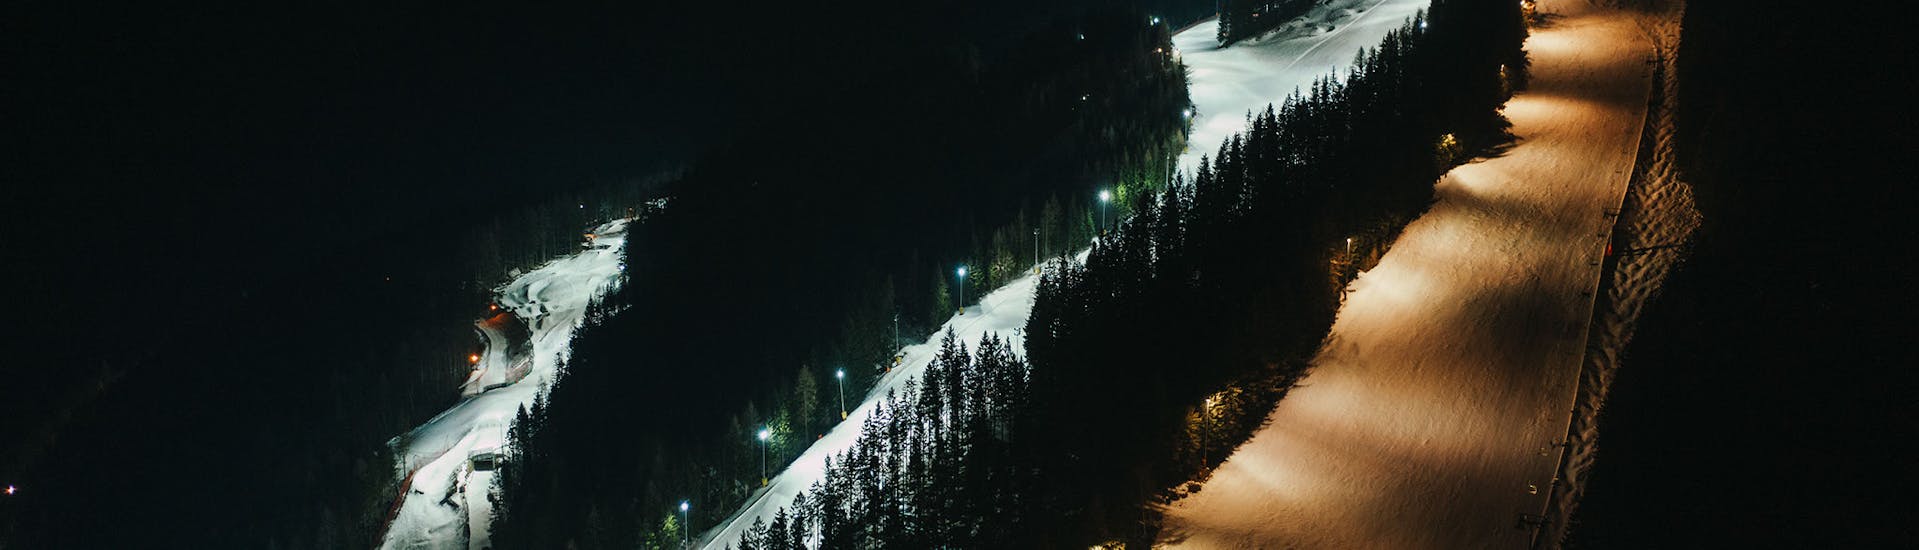 A spectacular slope at night during Private Snowboarding Lessons for Kids & Adults - Night Piste from Schneesportschule Zauberberg Semmering.